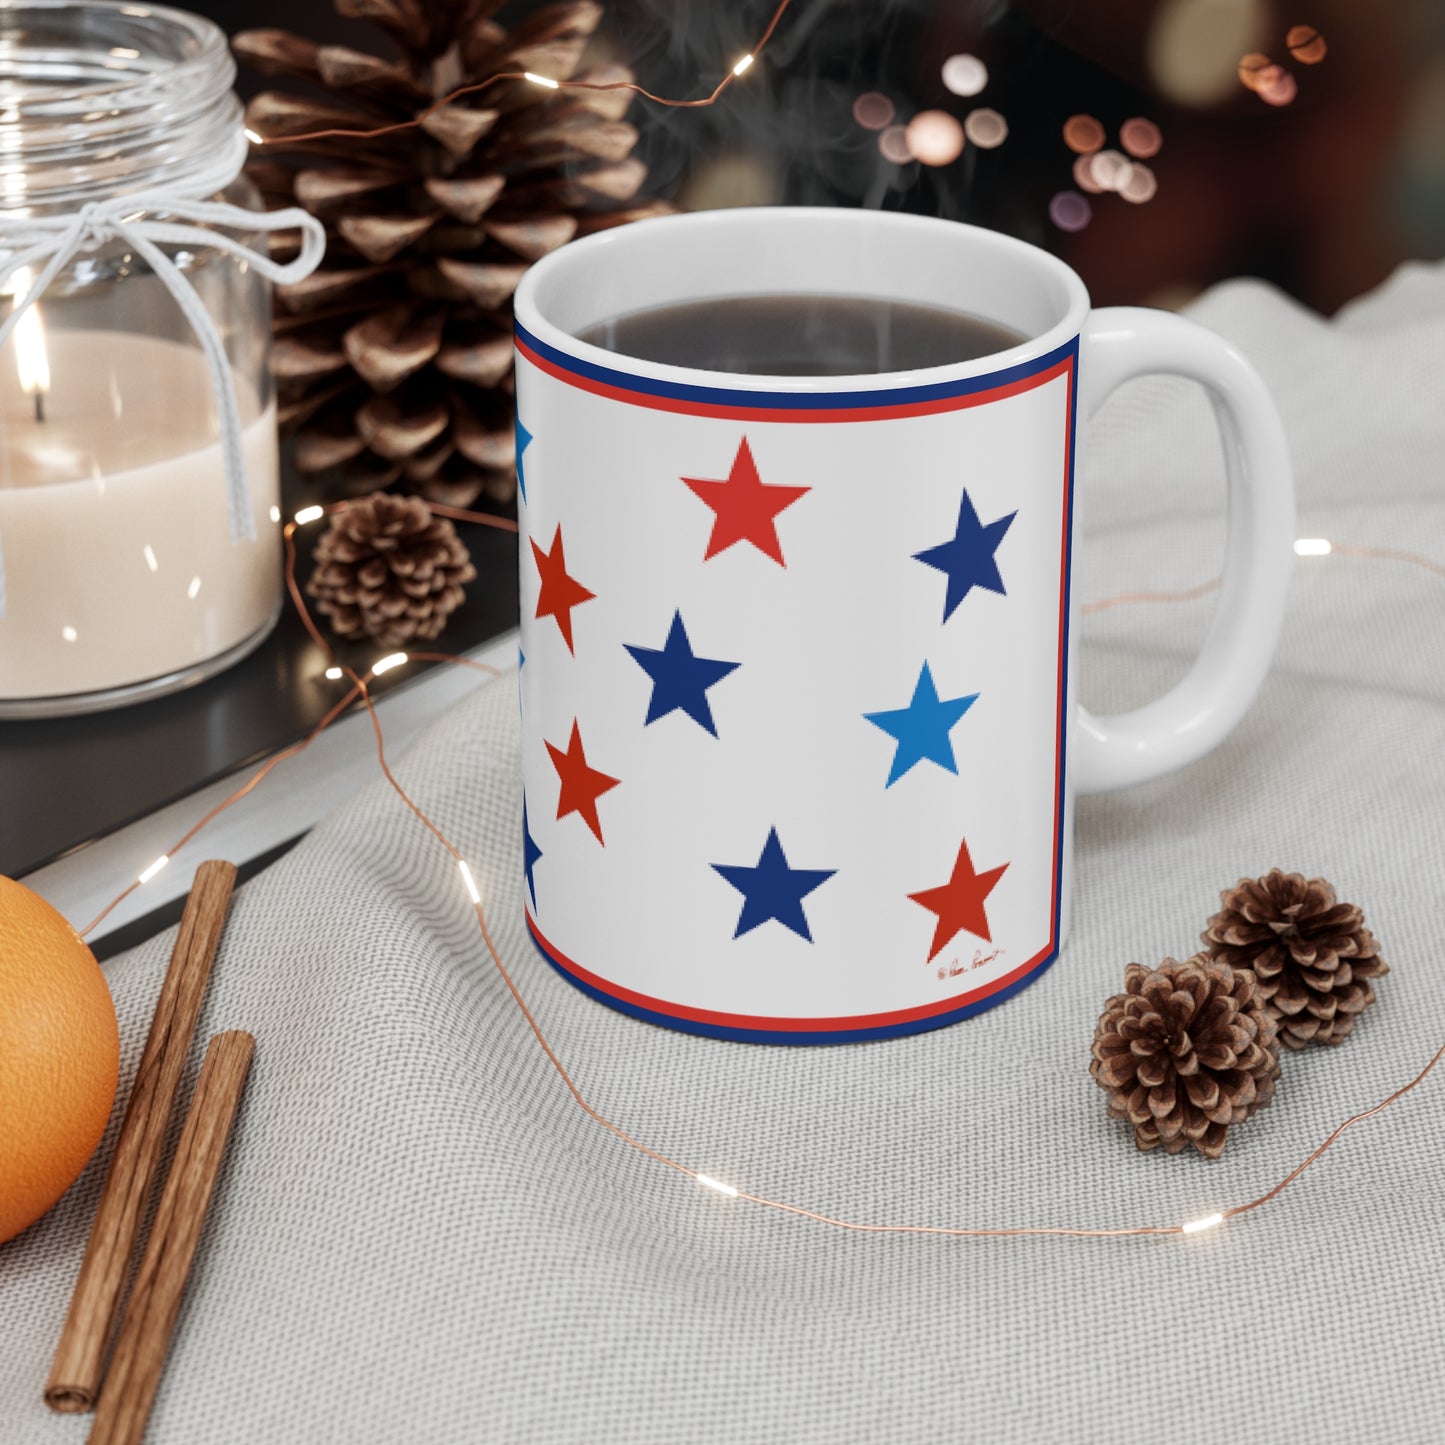 A patriotic Mug with Stars: Blue and Red on White; Ceramic; 11 oz. by Printify sits on a cloth next to pine cones, cinnamon sticks, an orange, and a lit candle in a jar.